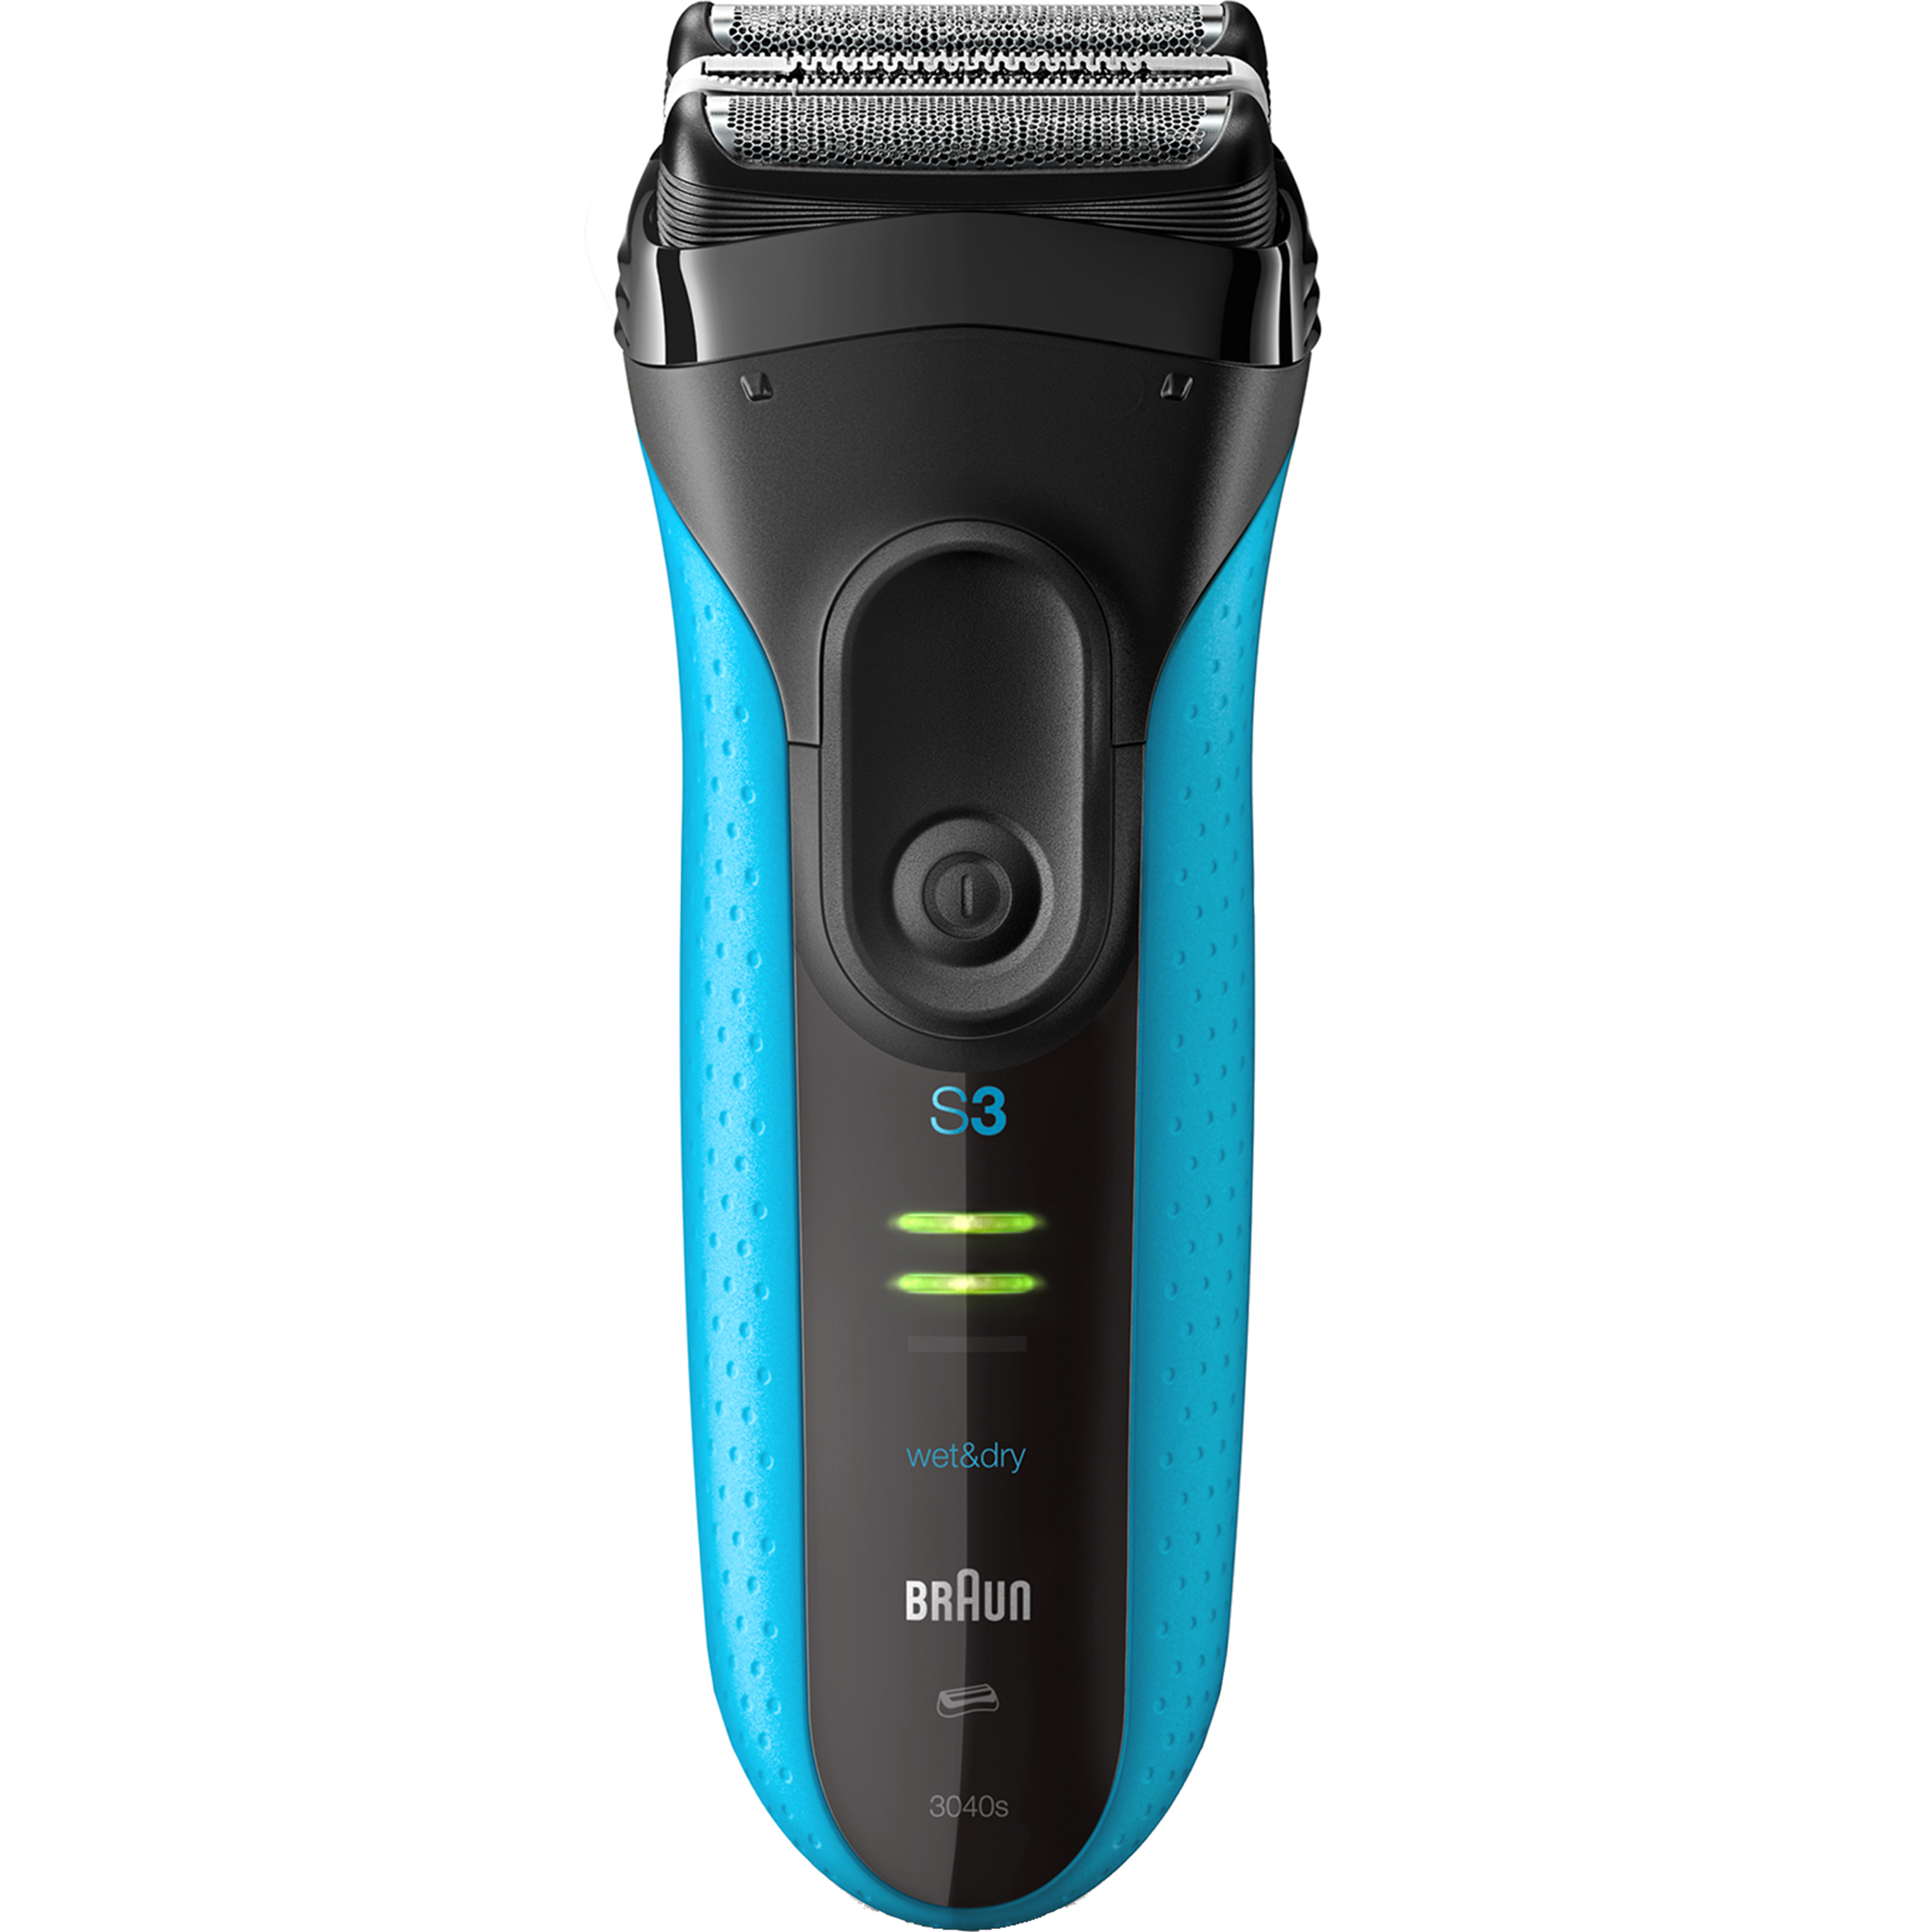 Braun Series 3 ProSkin 3040s Wet Dry Electric Shaver, Charging Stand - image 5 of 6